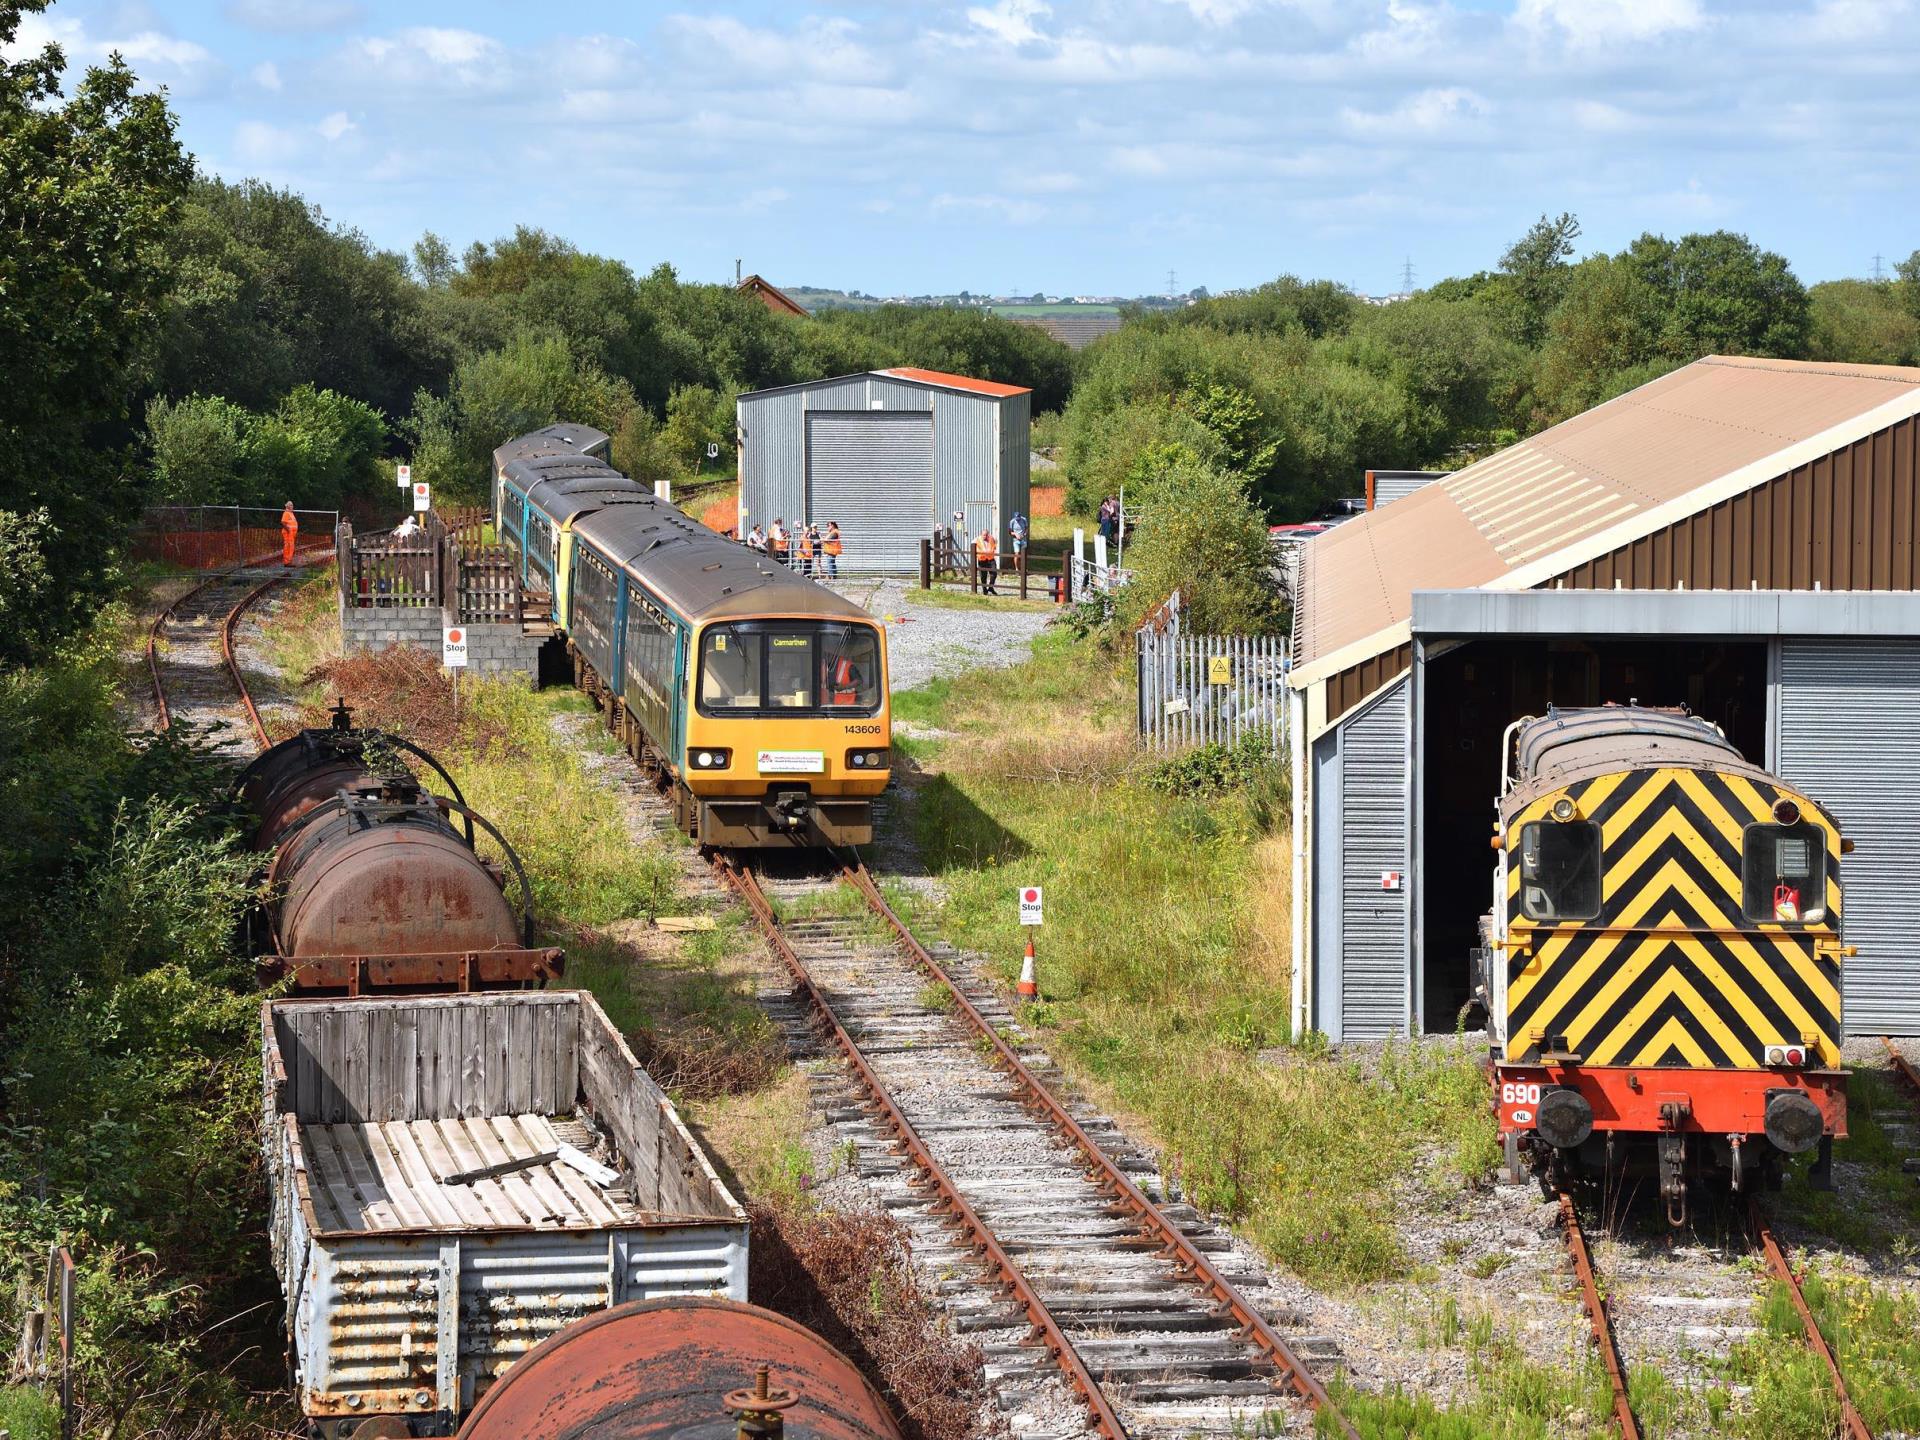 Overview of our station and shed at Cynheidre